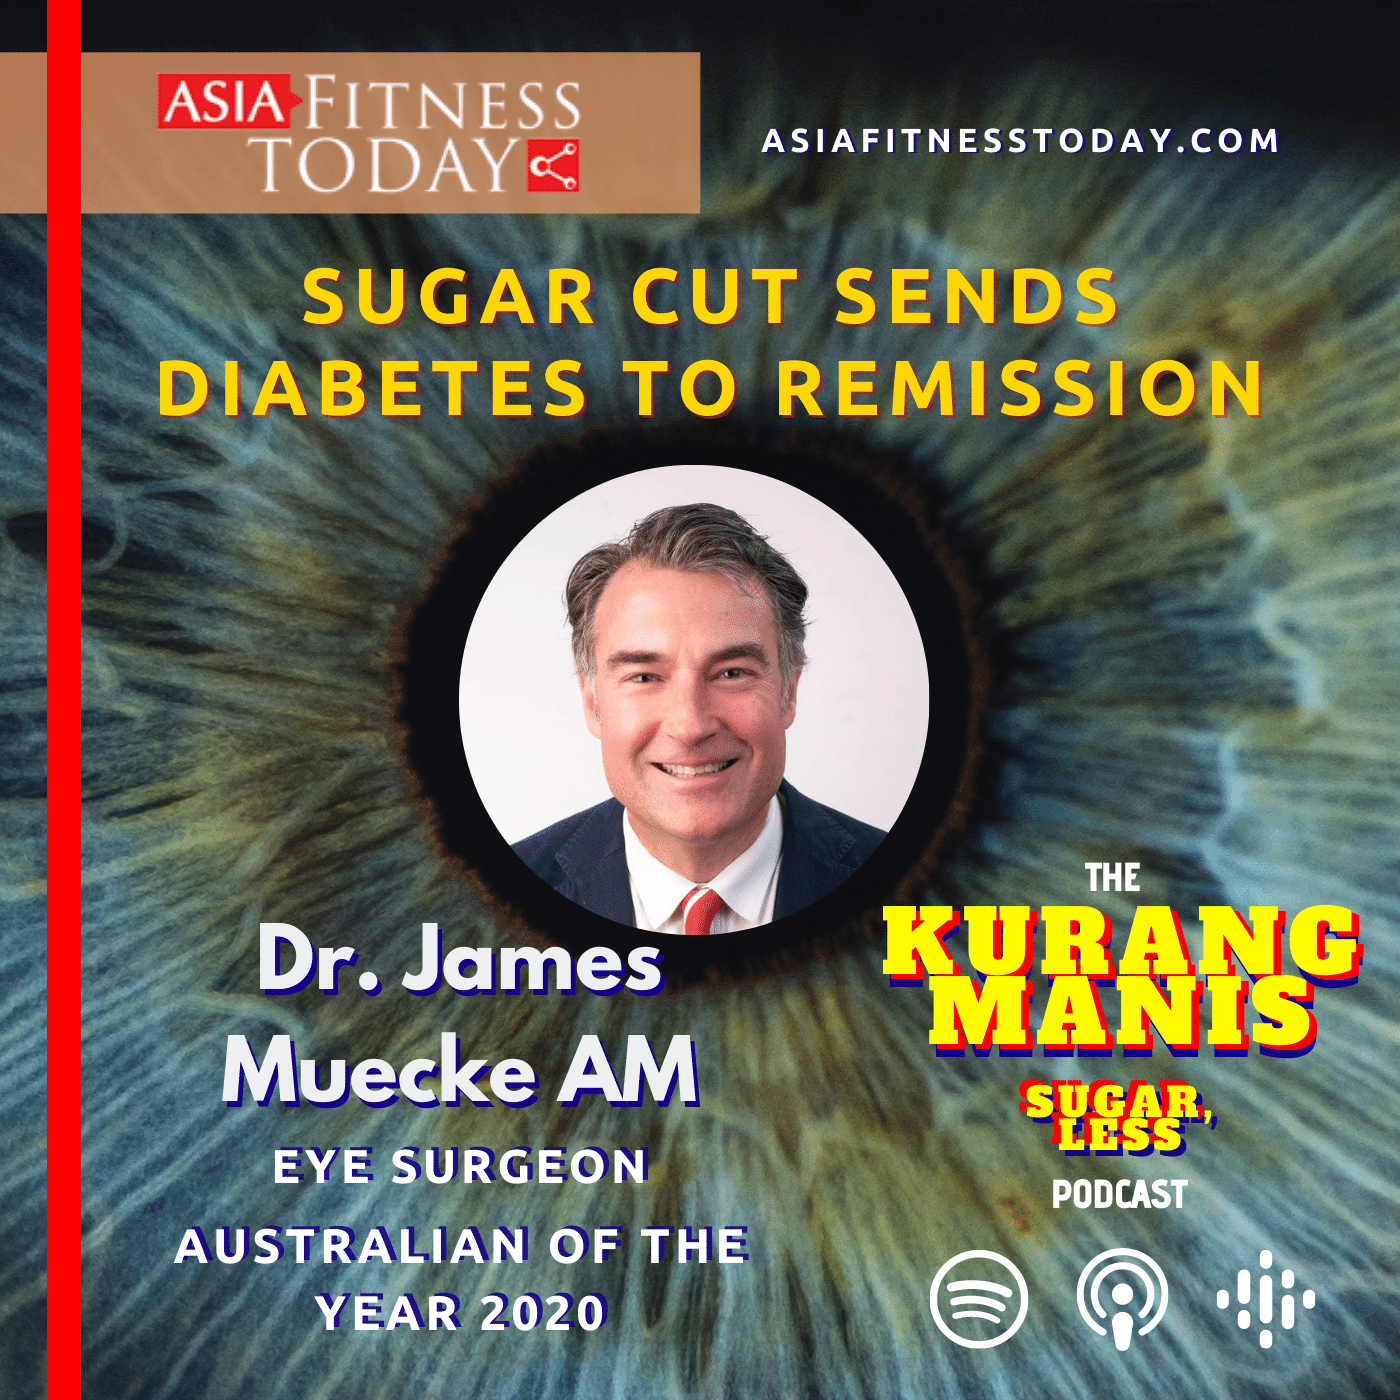 Asia Fitness Today The Kurang Manis (Sugar, Less) Podcast with Dr. James Muecke AM